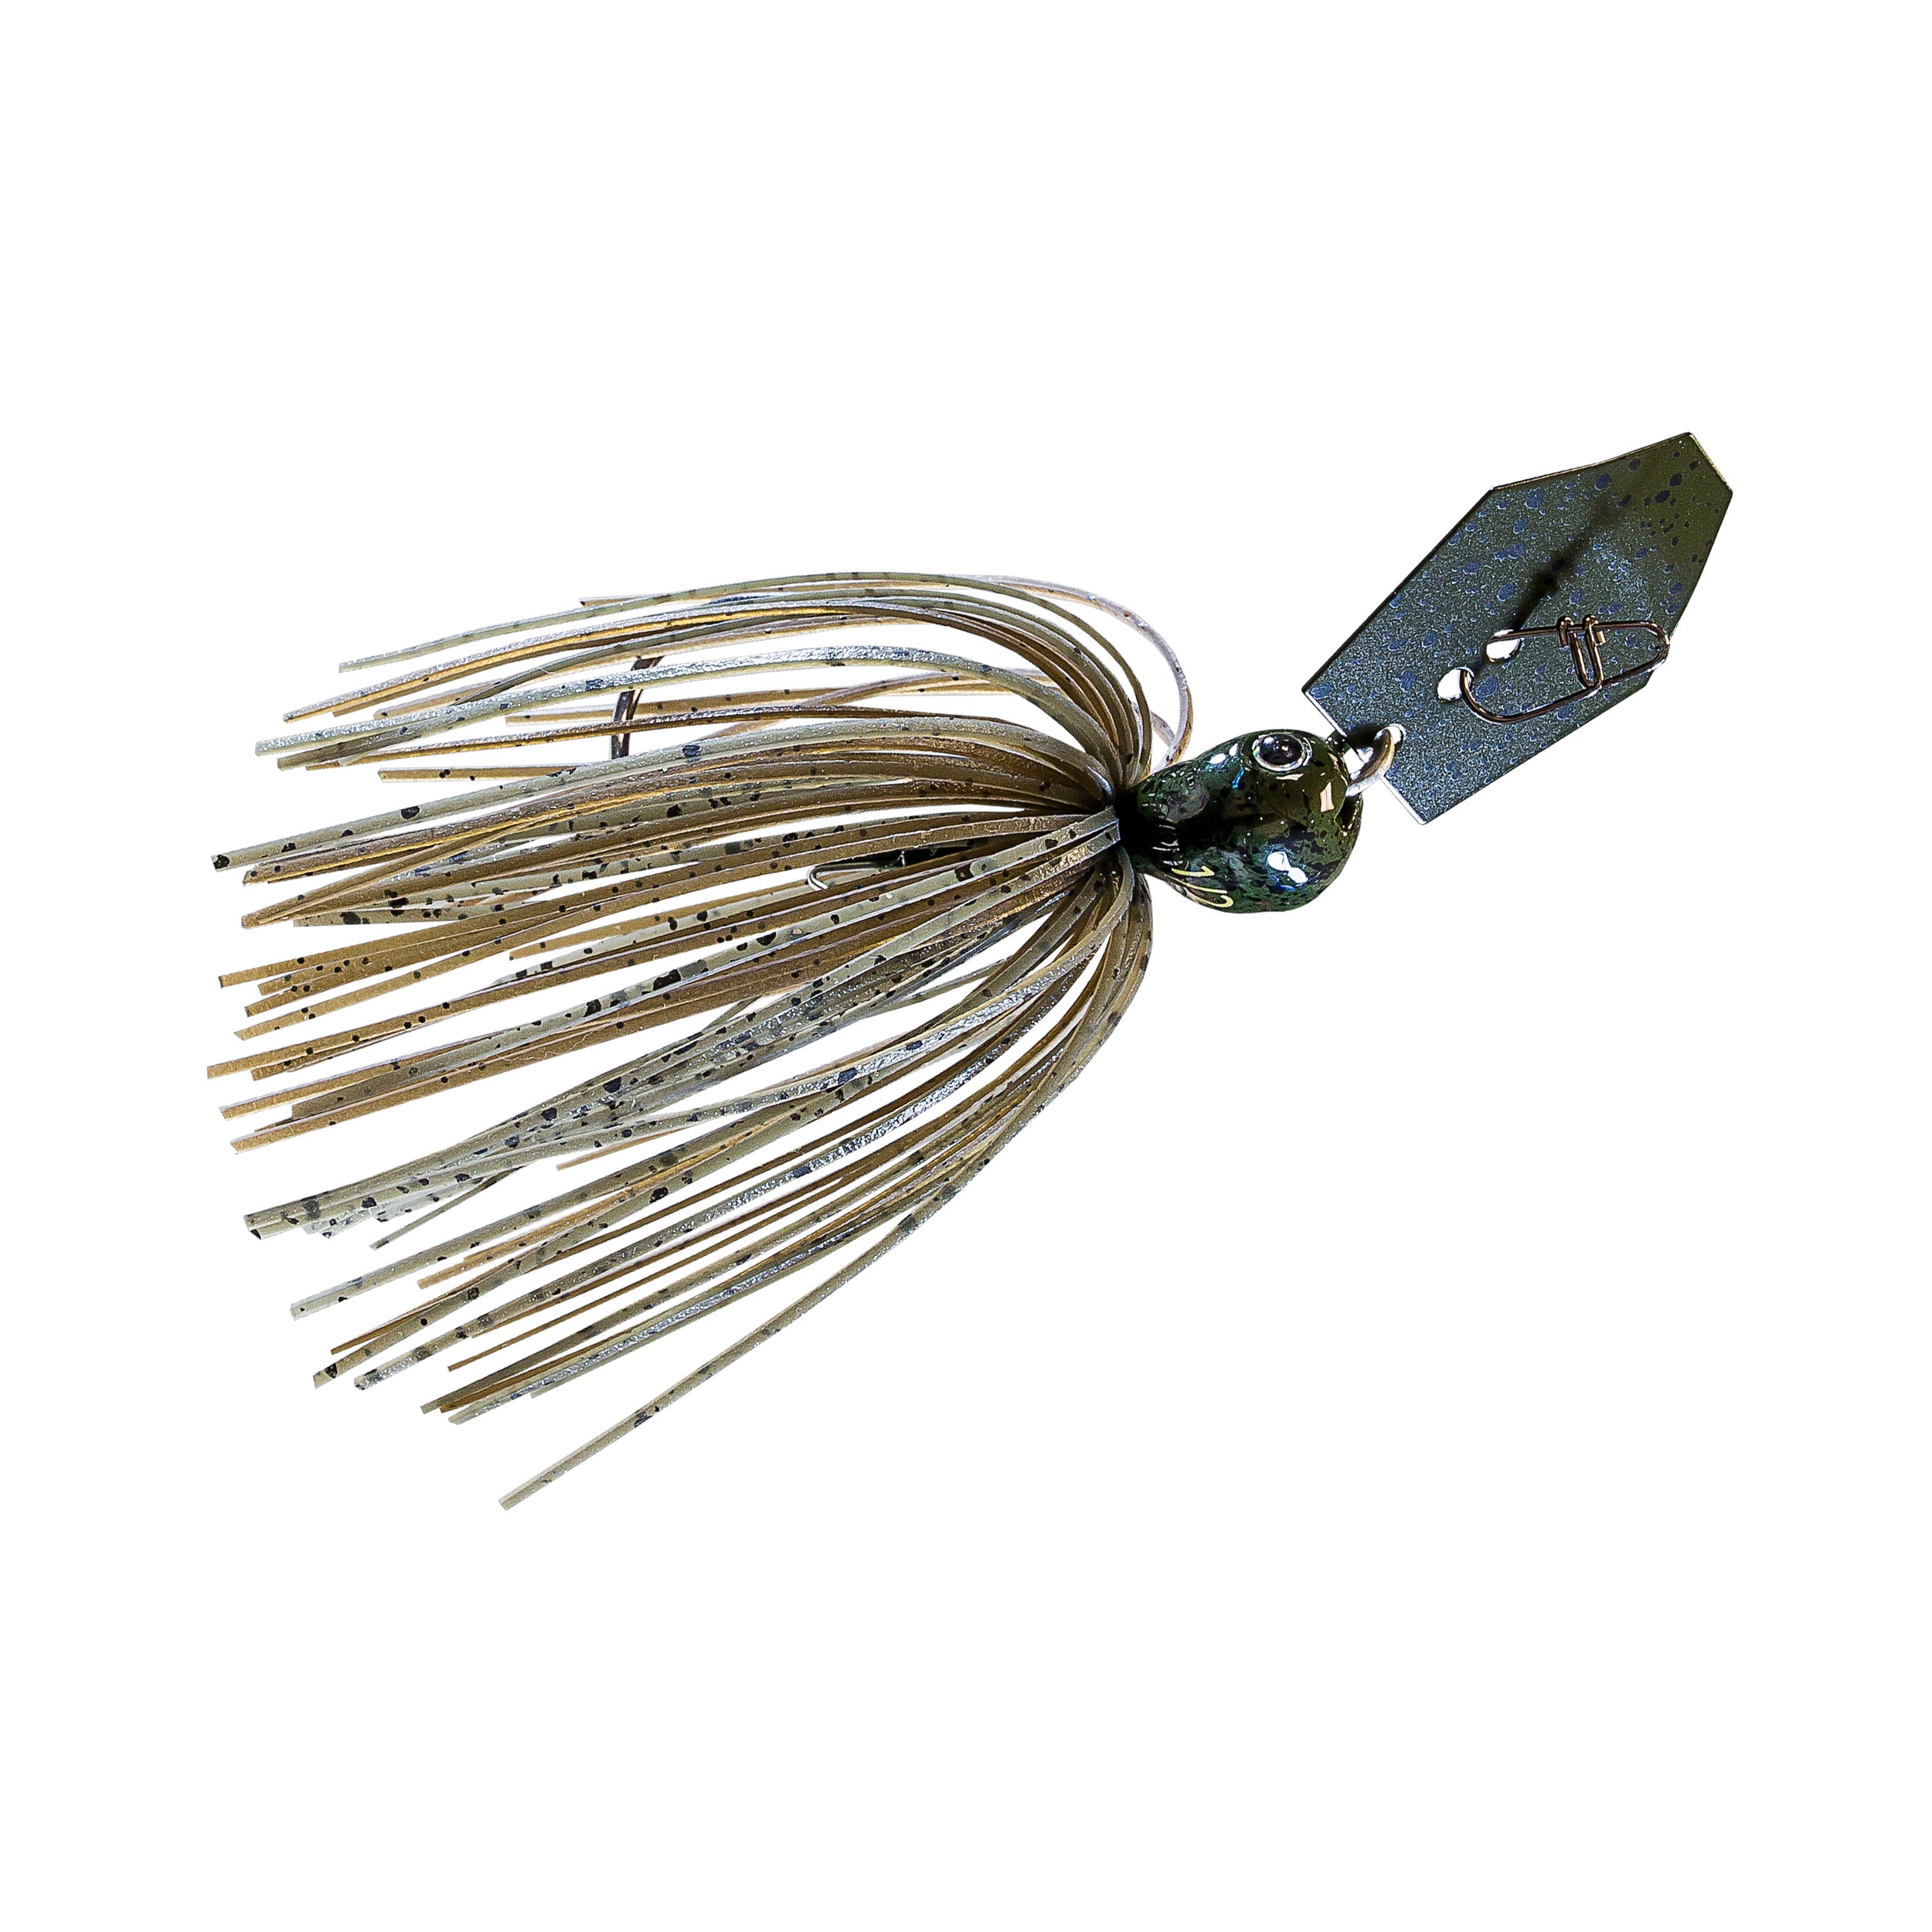 Z-MAN HELLRAIZER  Copperstate Tackle